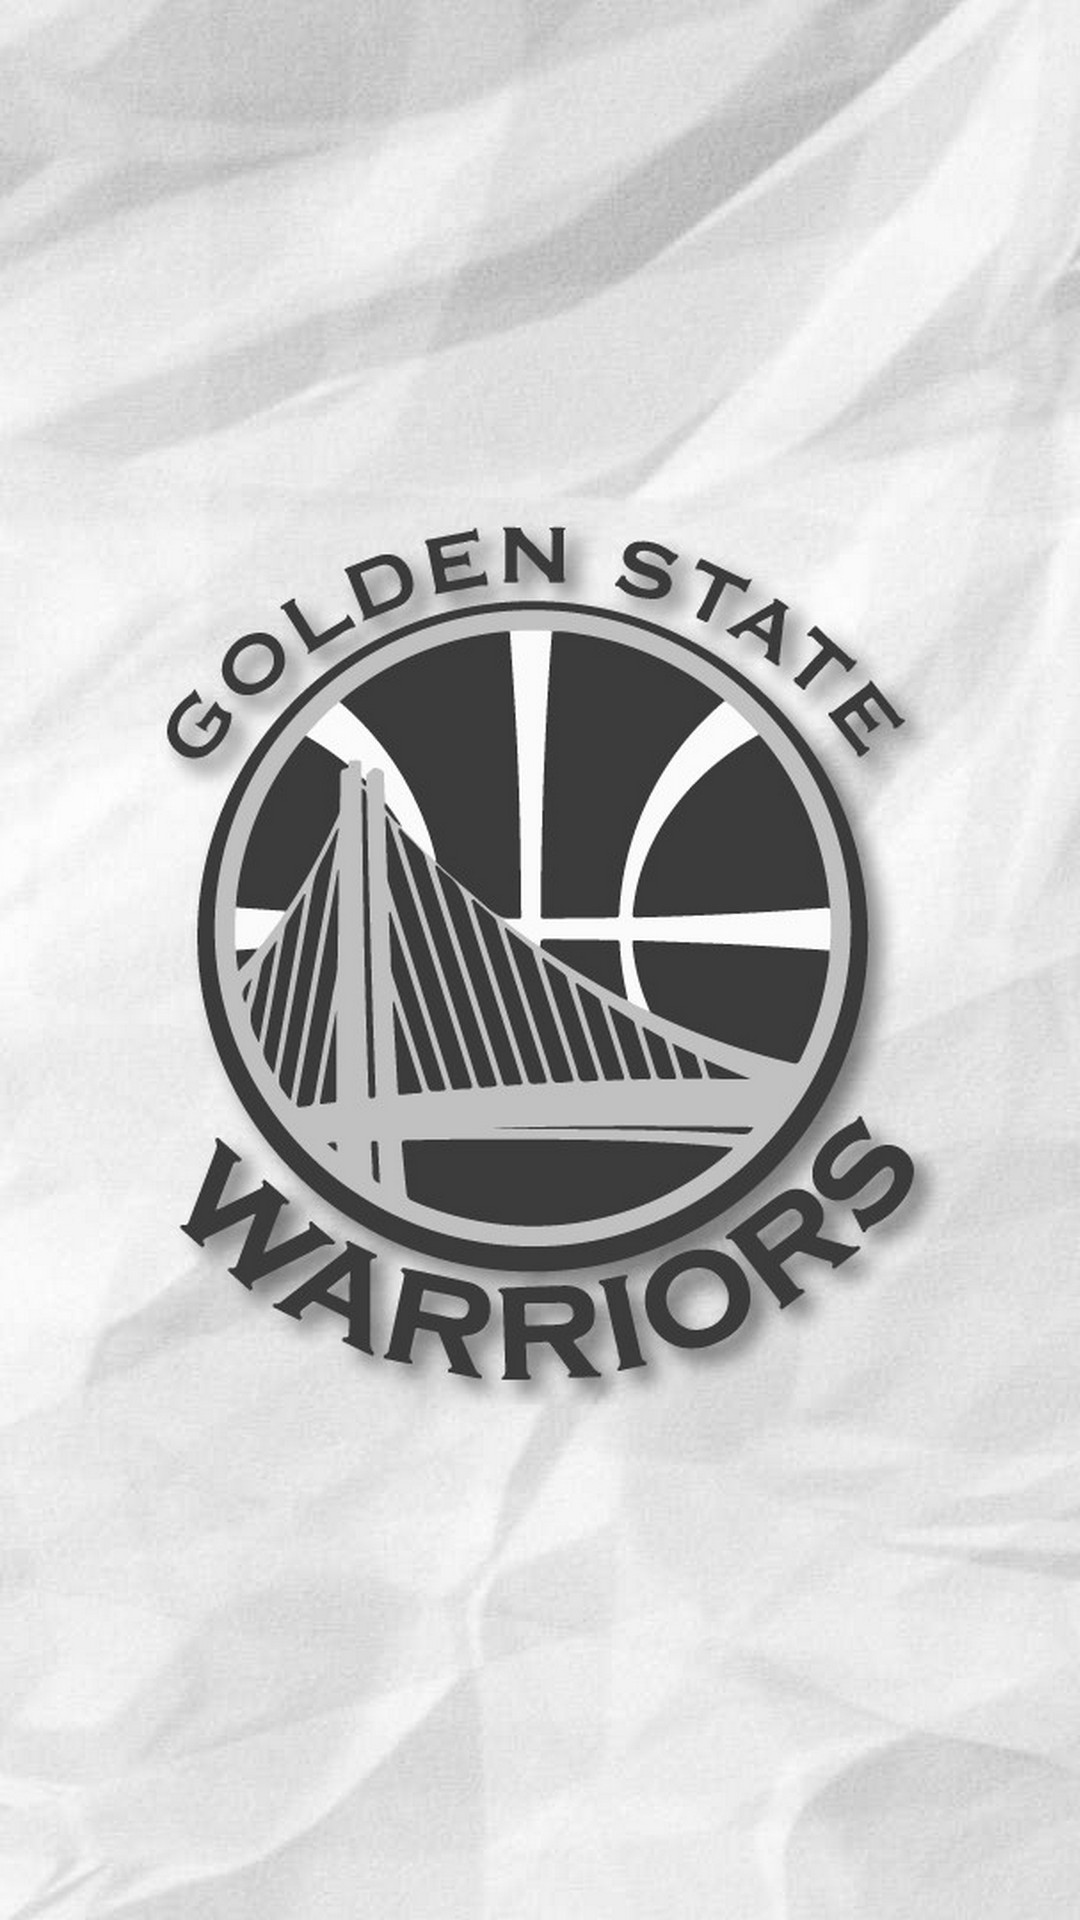 iPhone 7 Wallpaper Golden State Warriors with image resolution 1080x1920 pixel. You can make this wallpaper for your iPhone 5, 6, 7, 8, X backgrounds, Mobile Screensaver, or iPad Lock Screen